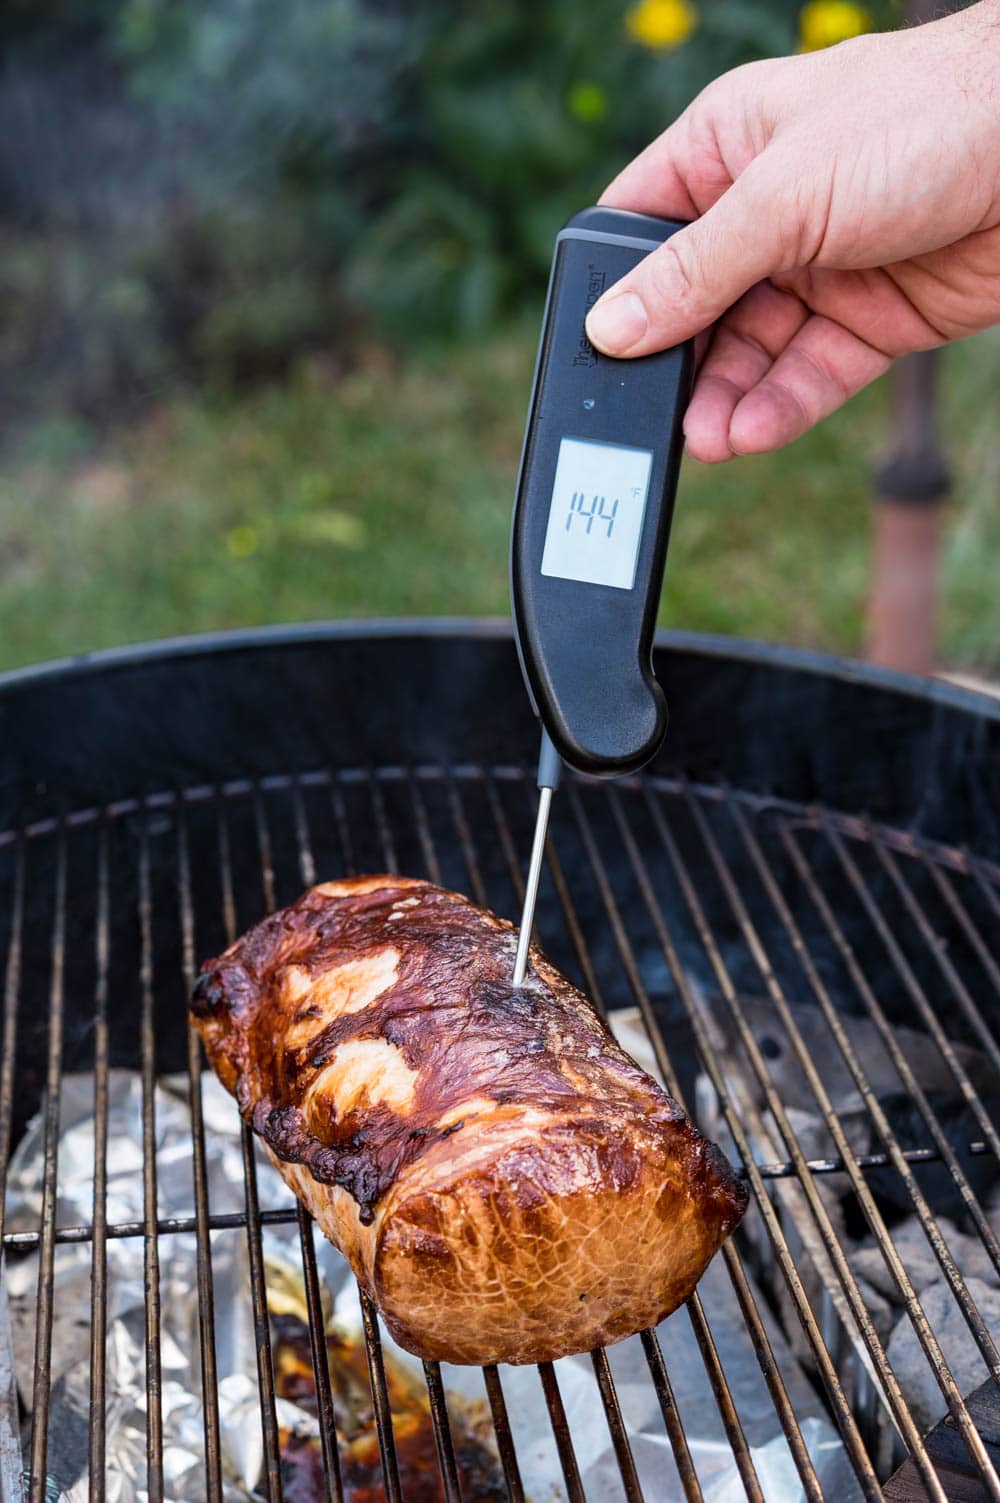 Using an instant read thermometer to check the temperature of the roast.